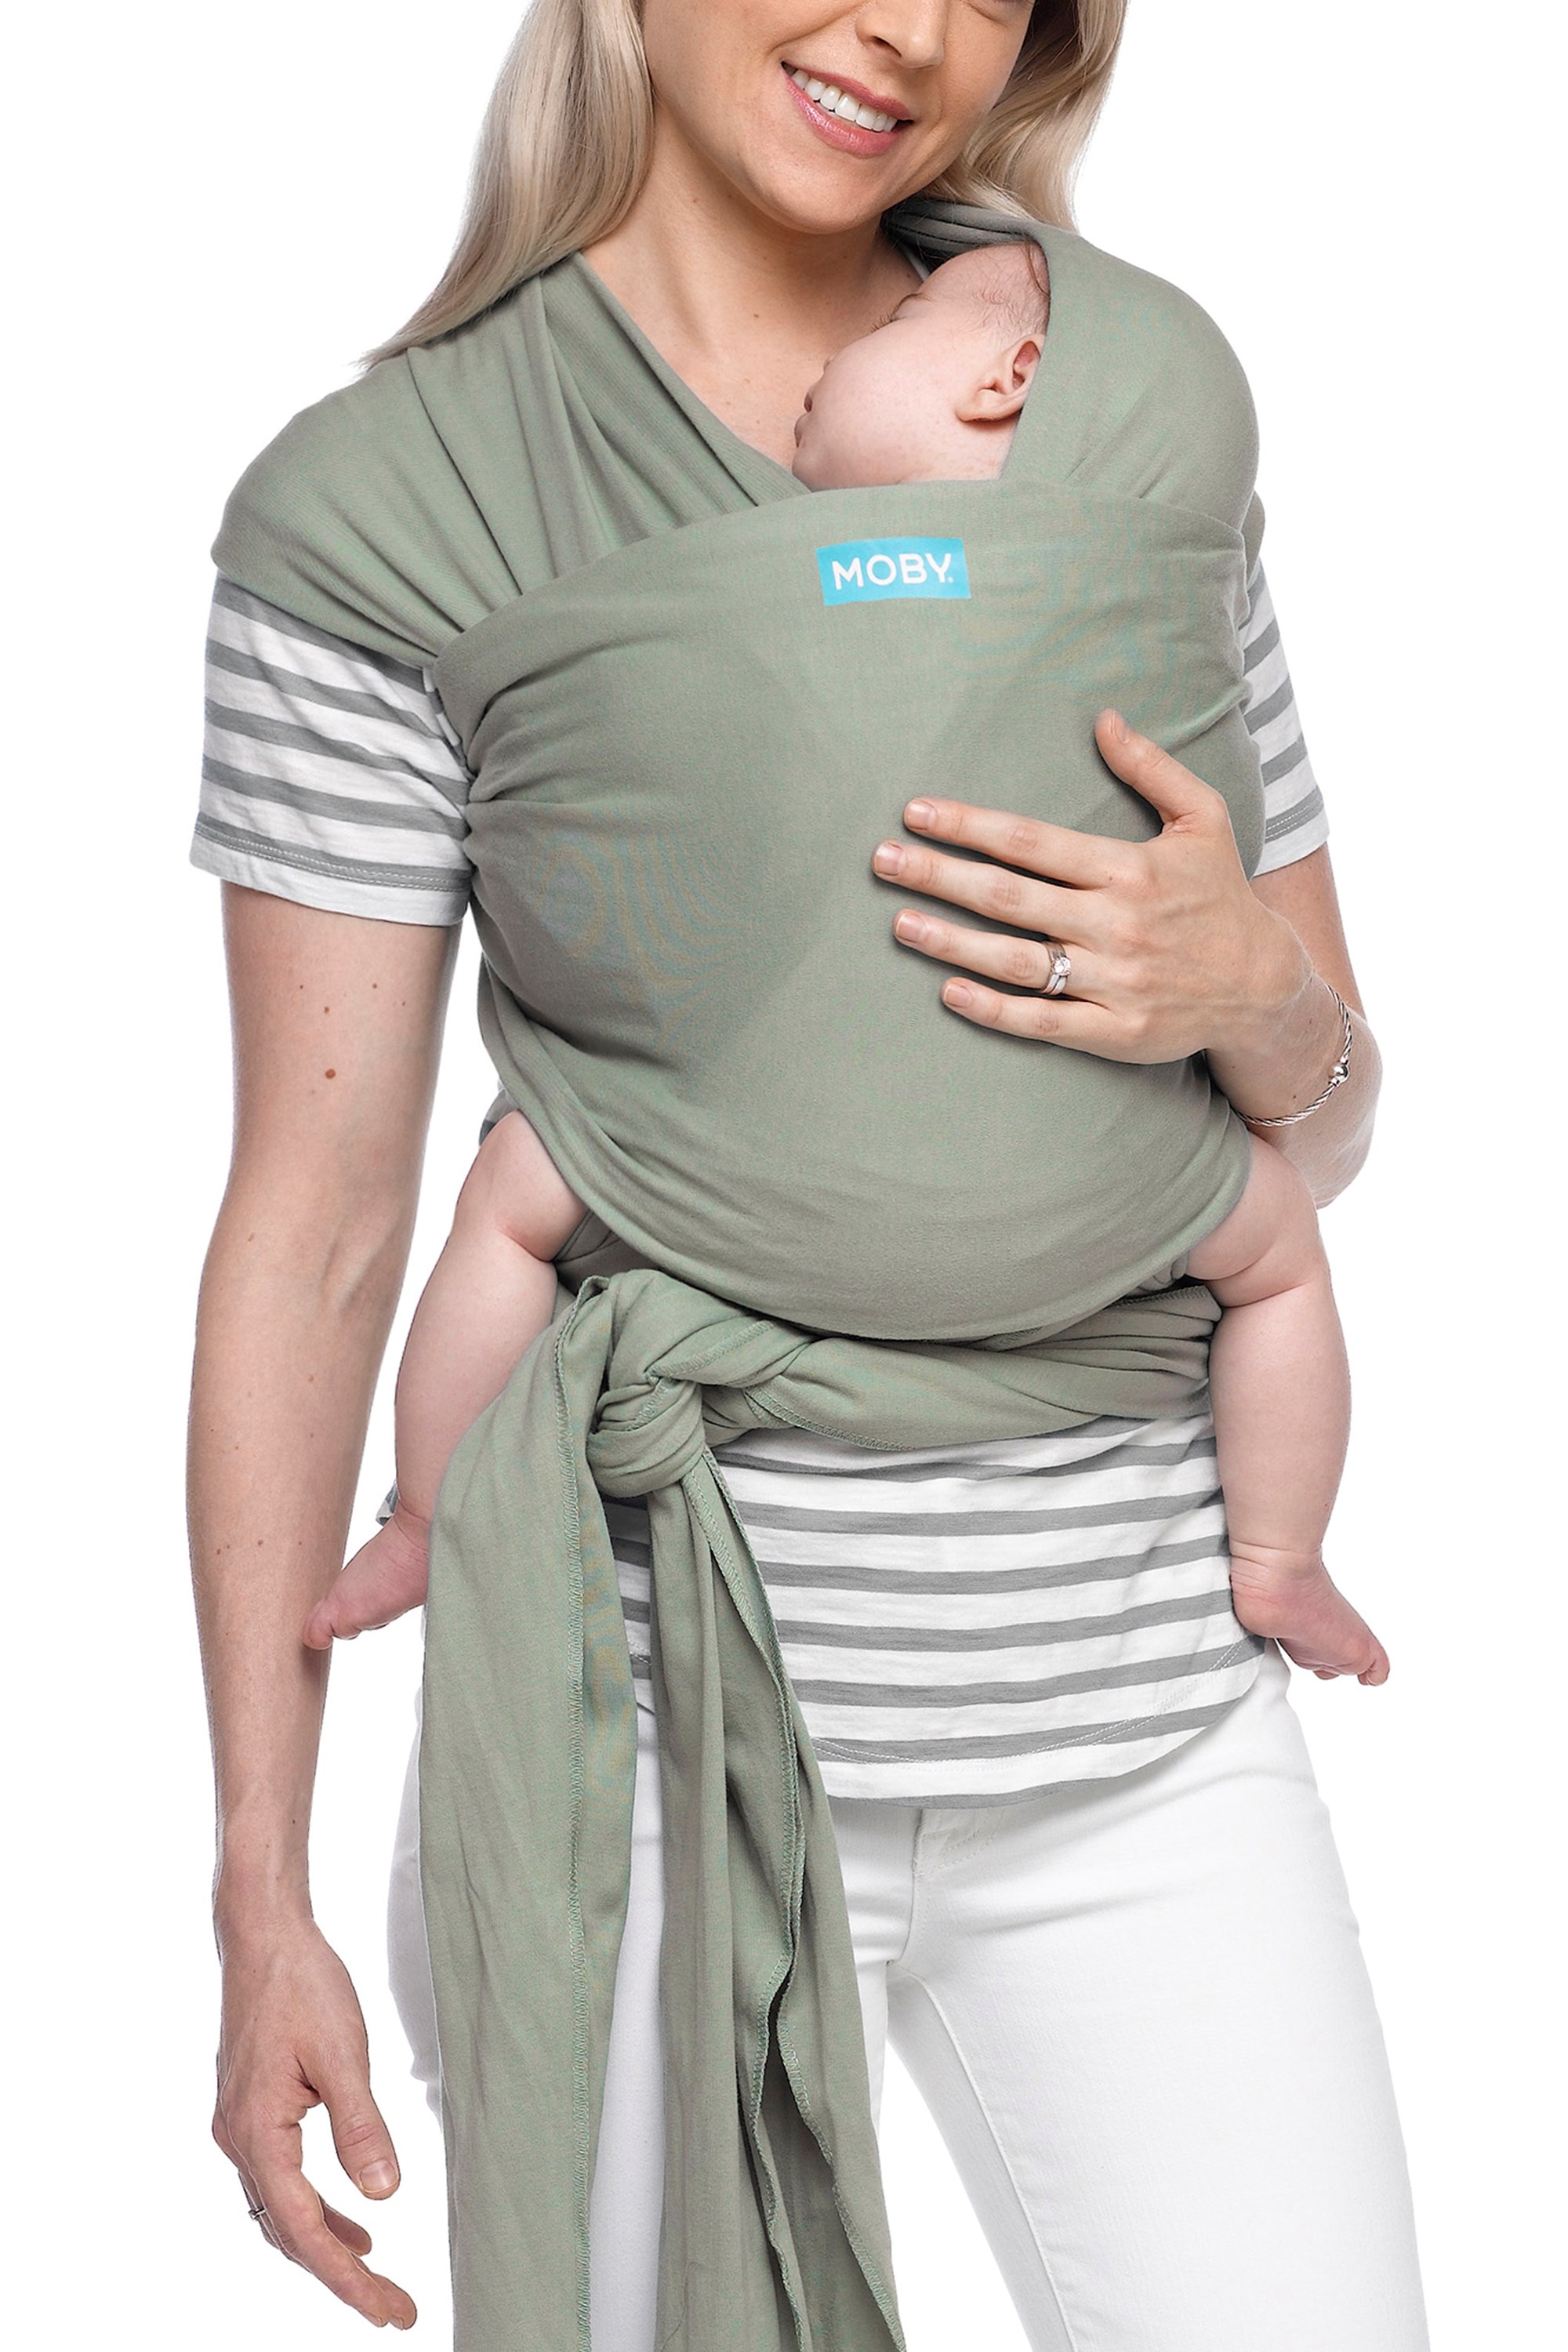 Classic Baby Carrier Wrap -